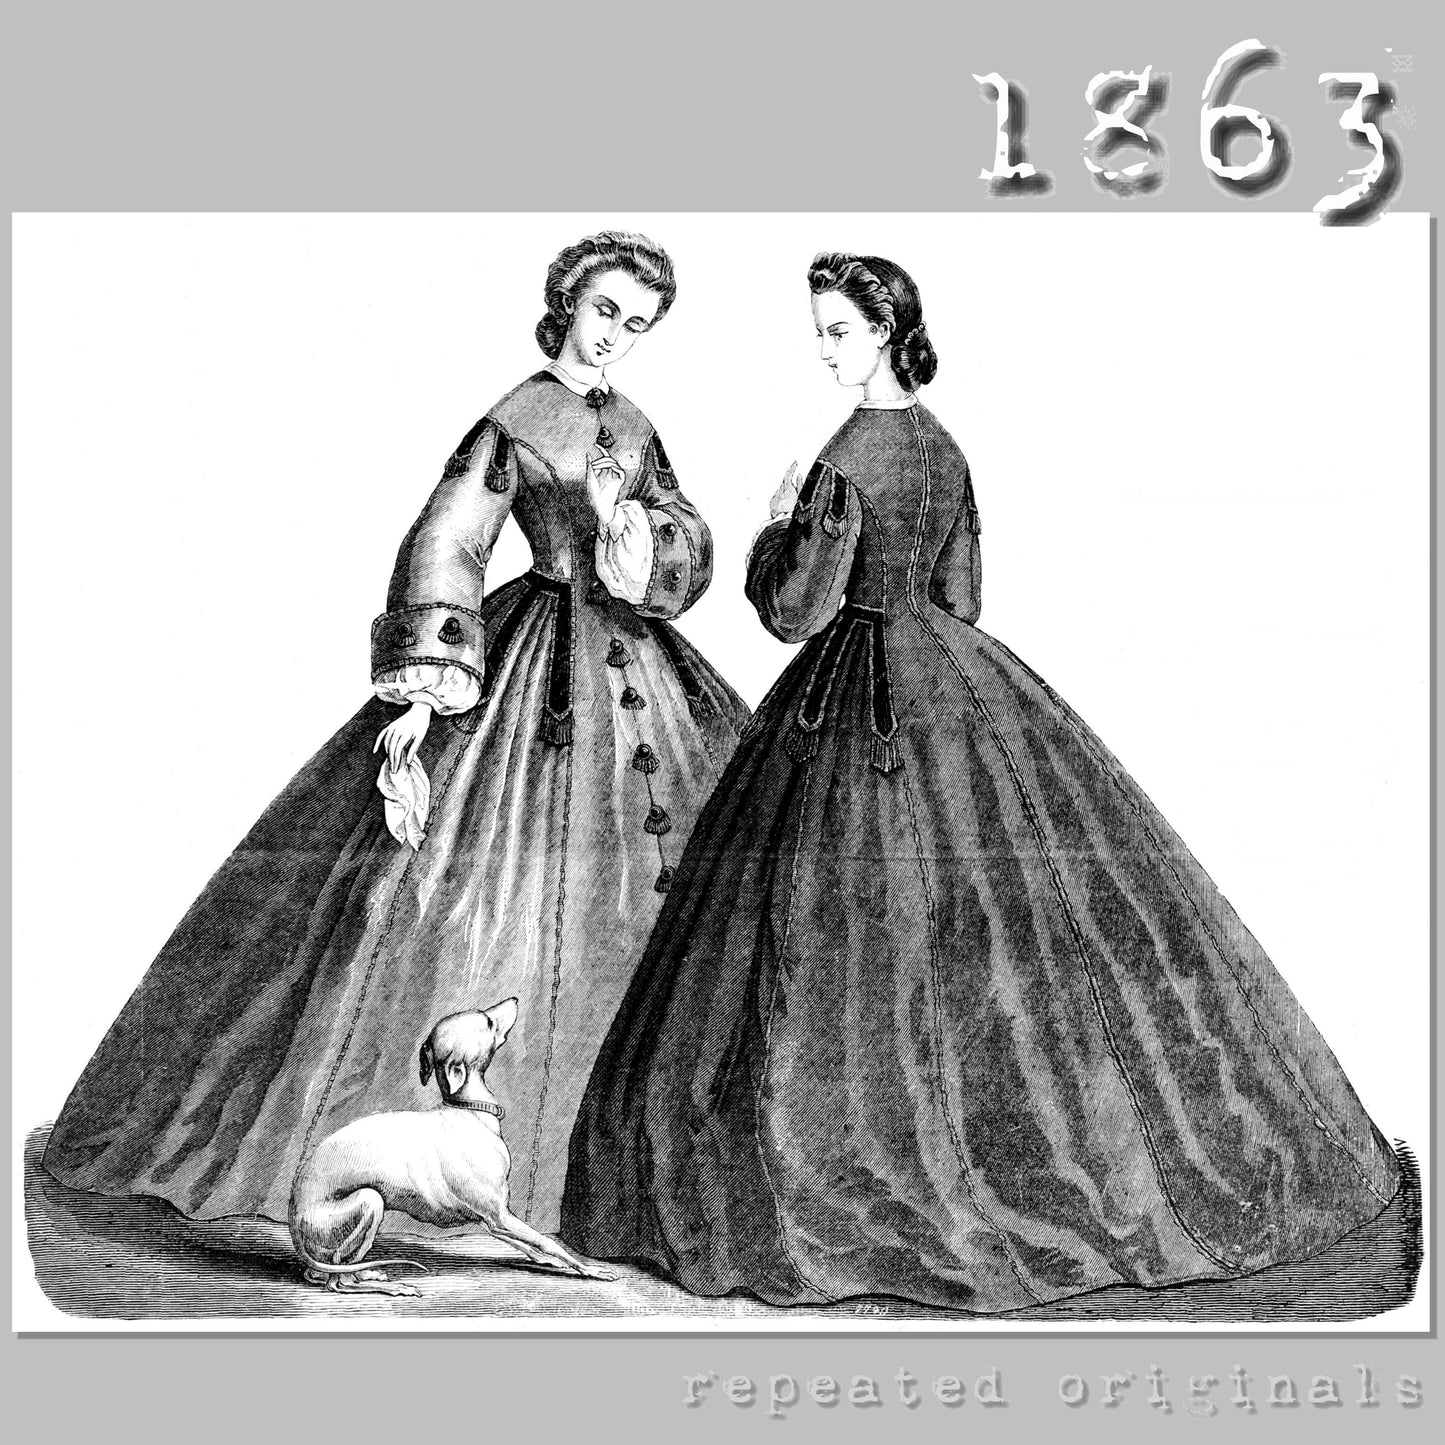 1863 Princess Seamed Robe Sewing Pattern - INSTANT DOWNLOAD PDF